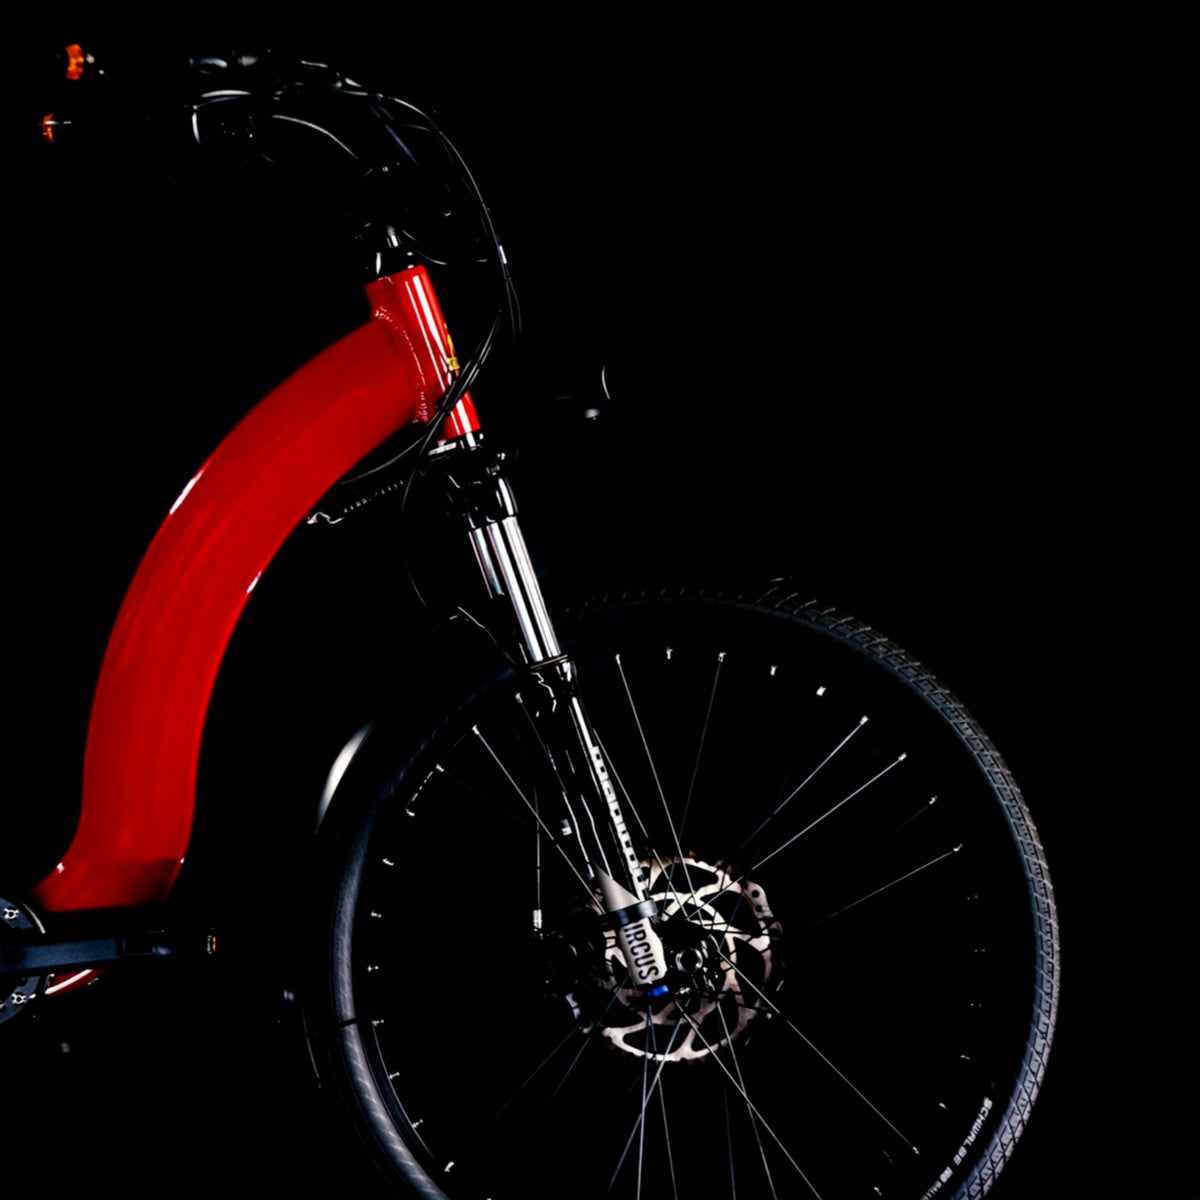 A side view of the glossy red frame.